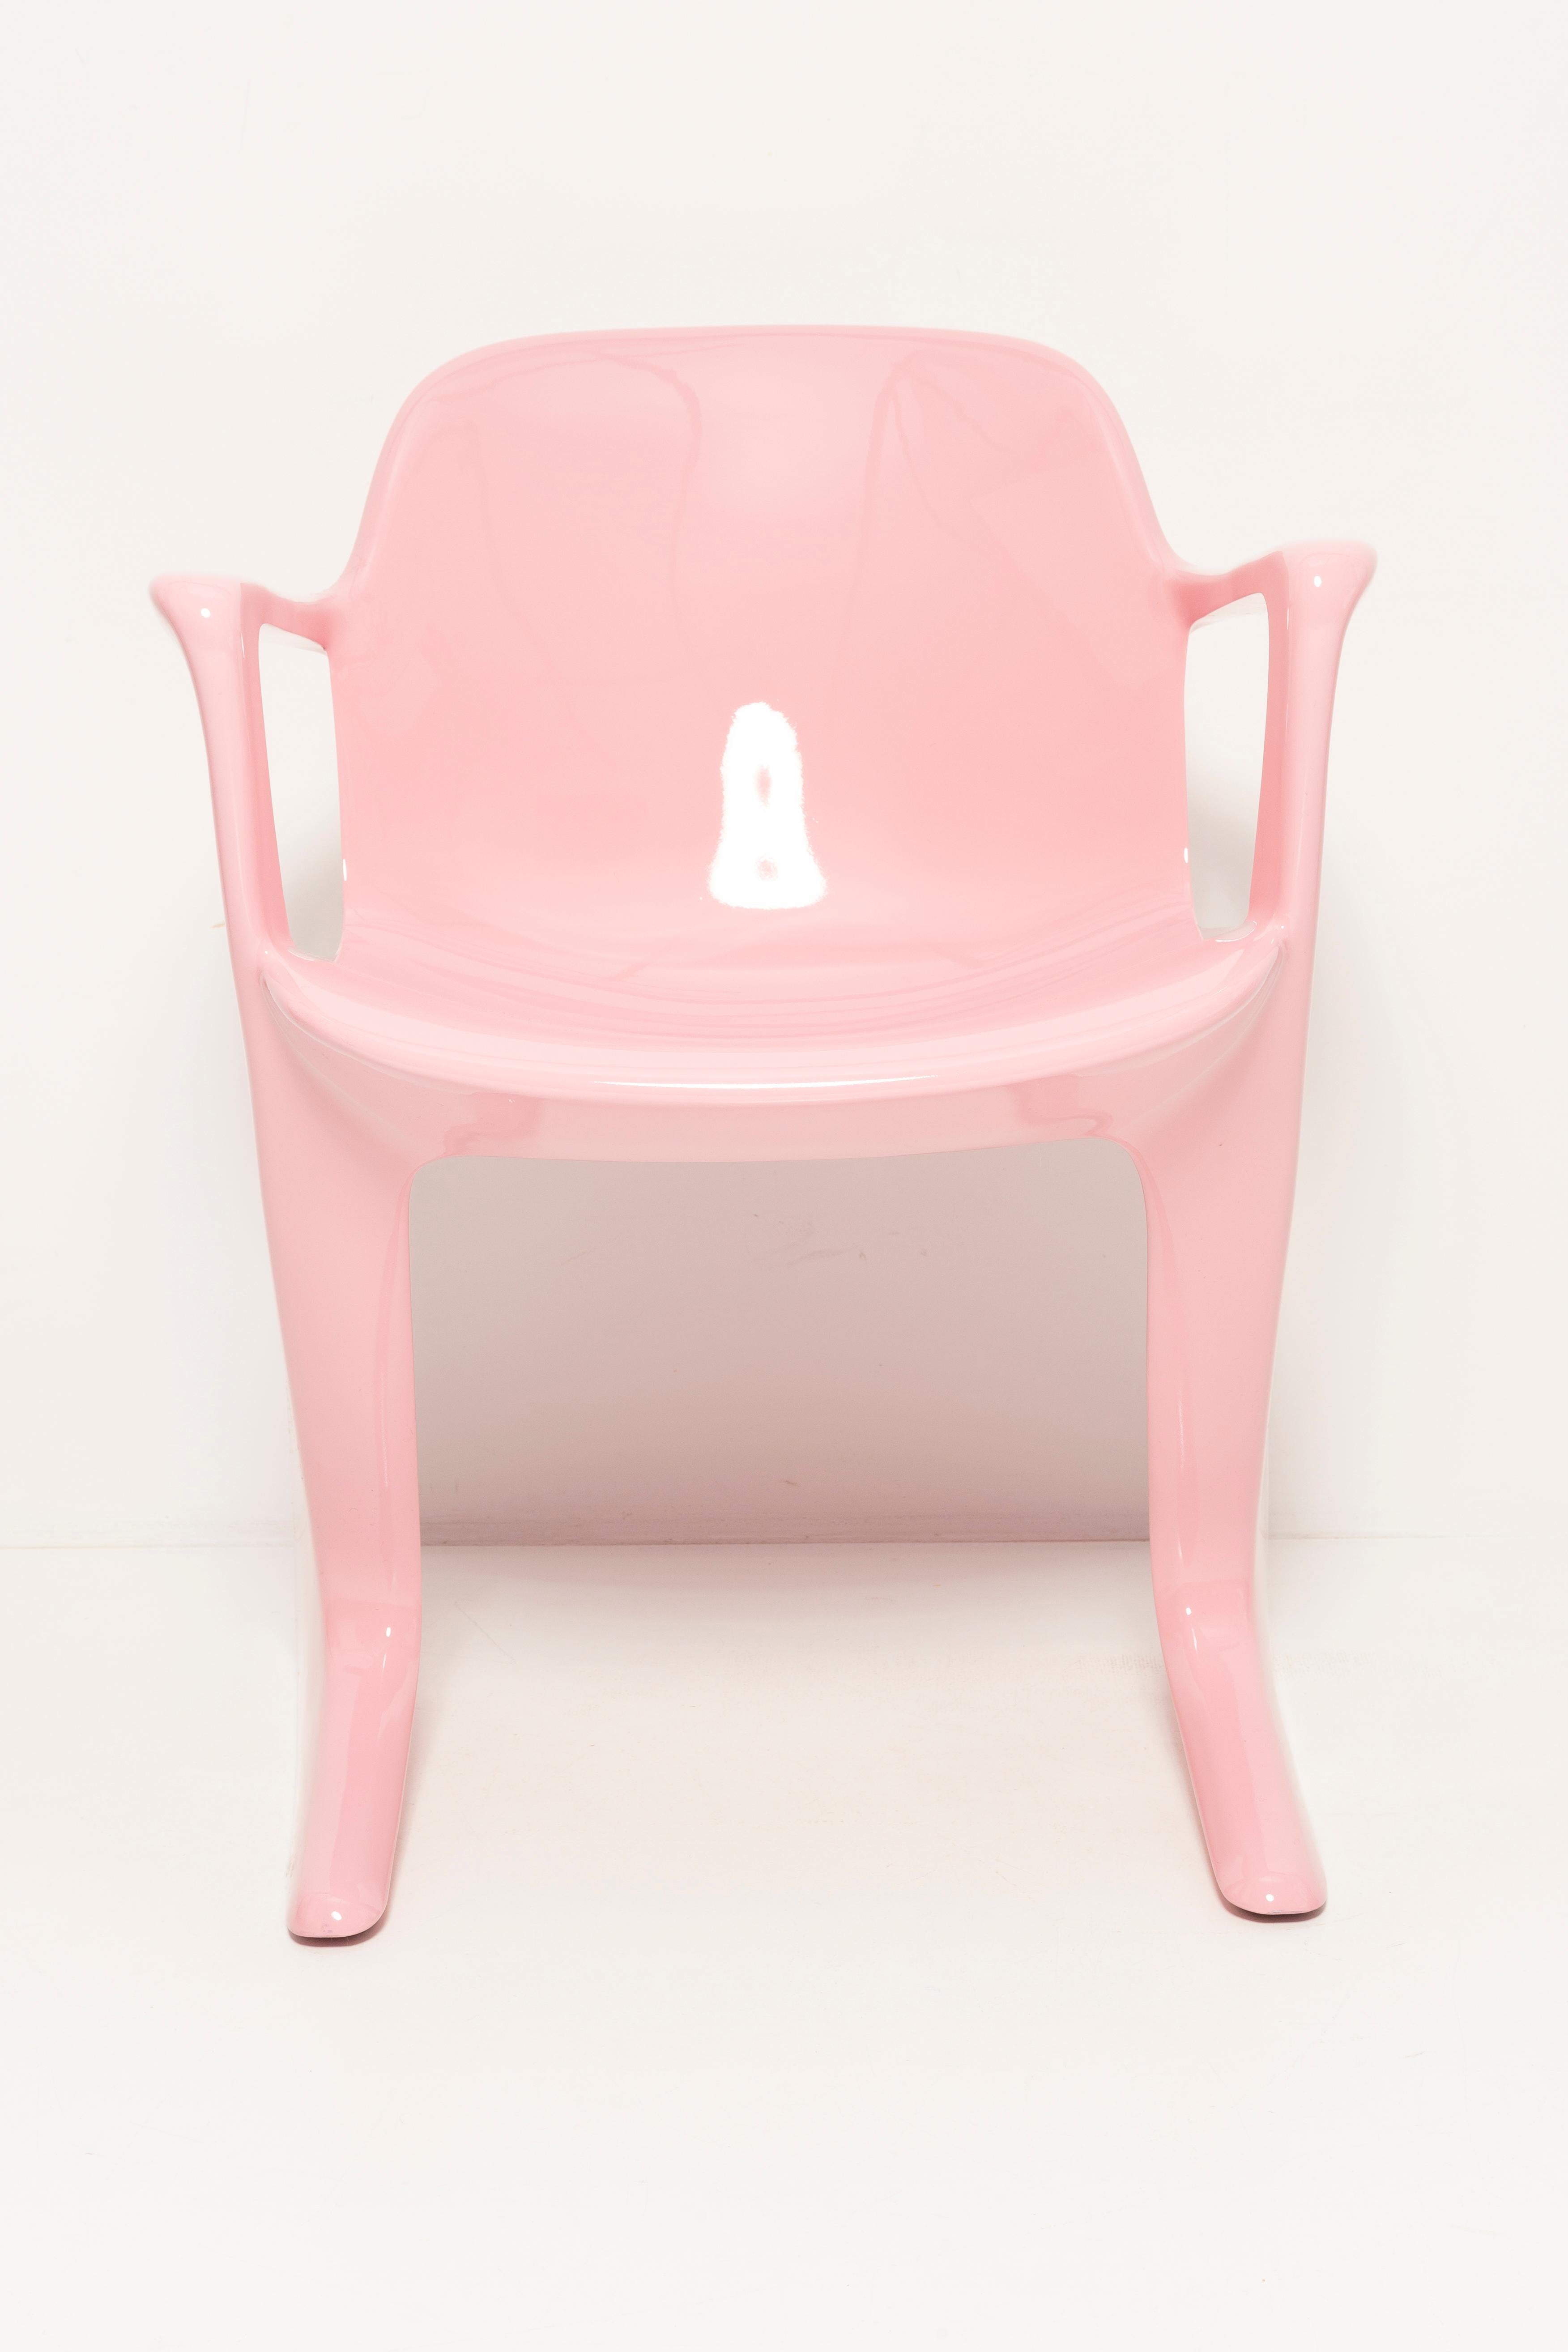 Set of Six Midcentury Pink Kangaroo Chairs, Ernst Moeckl, Germany, 1960s For Sale 4